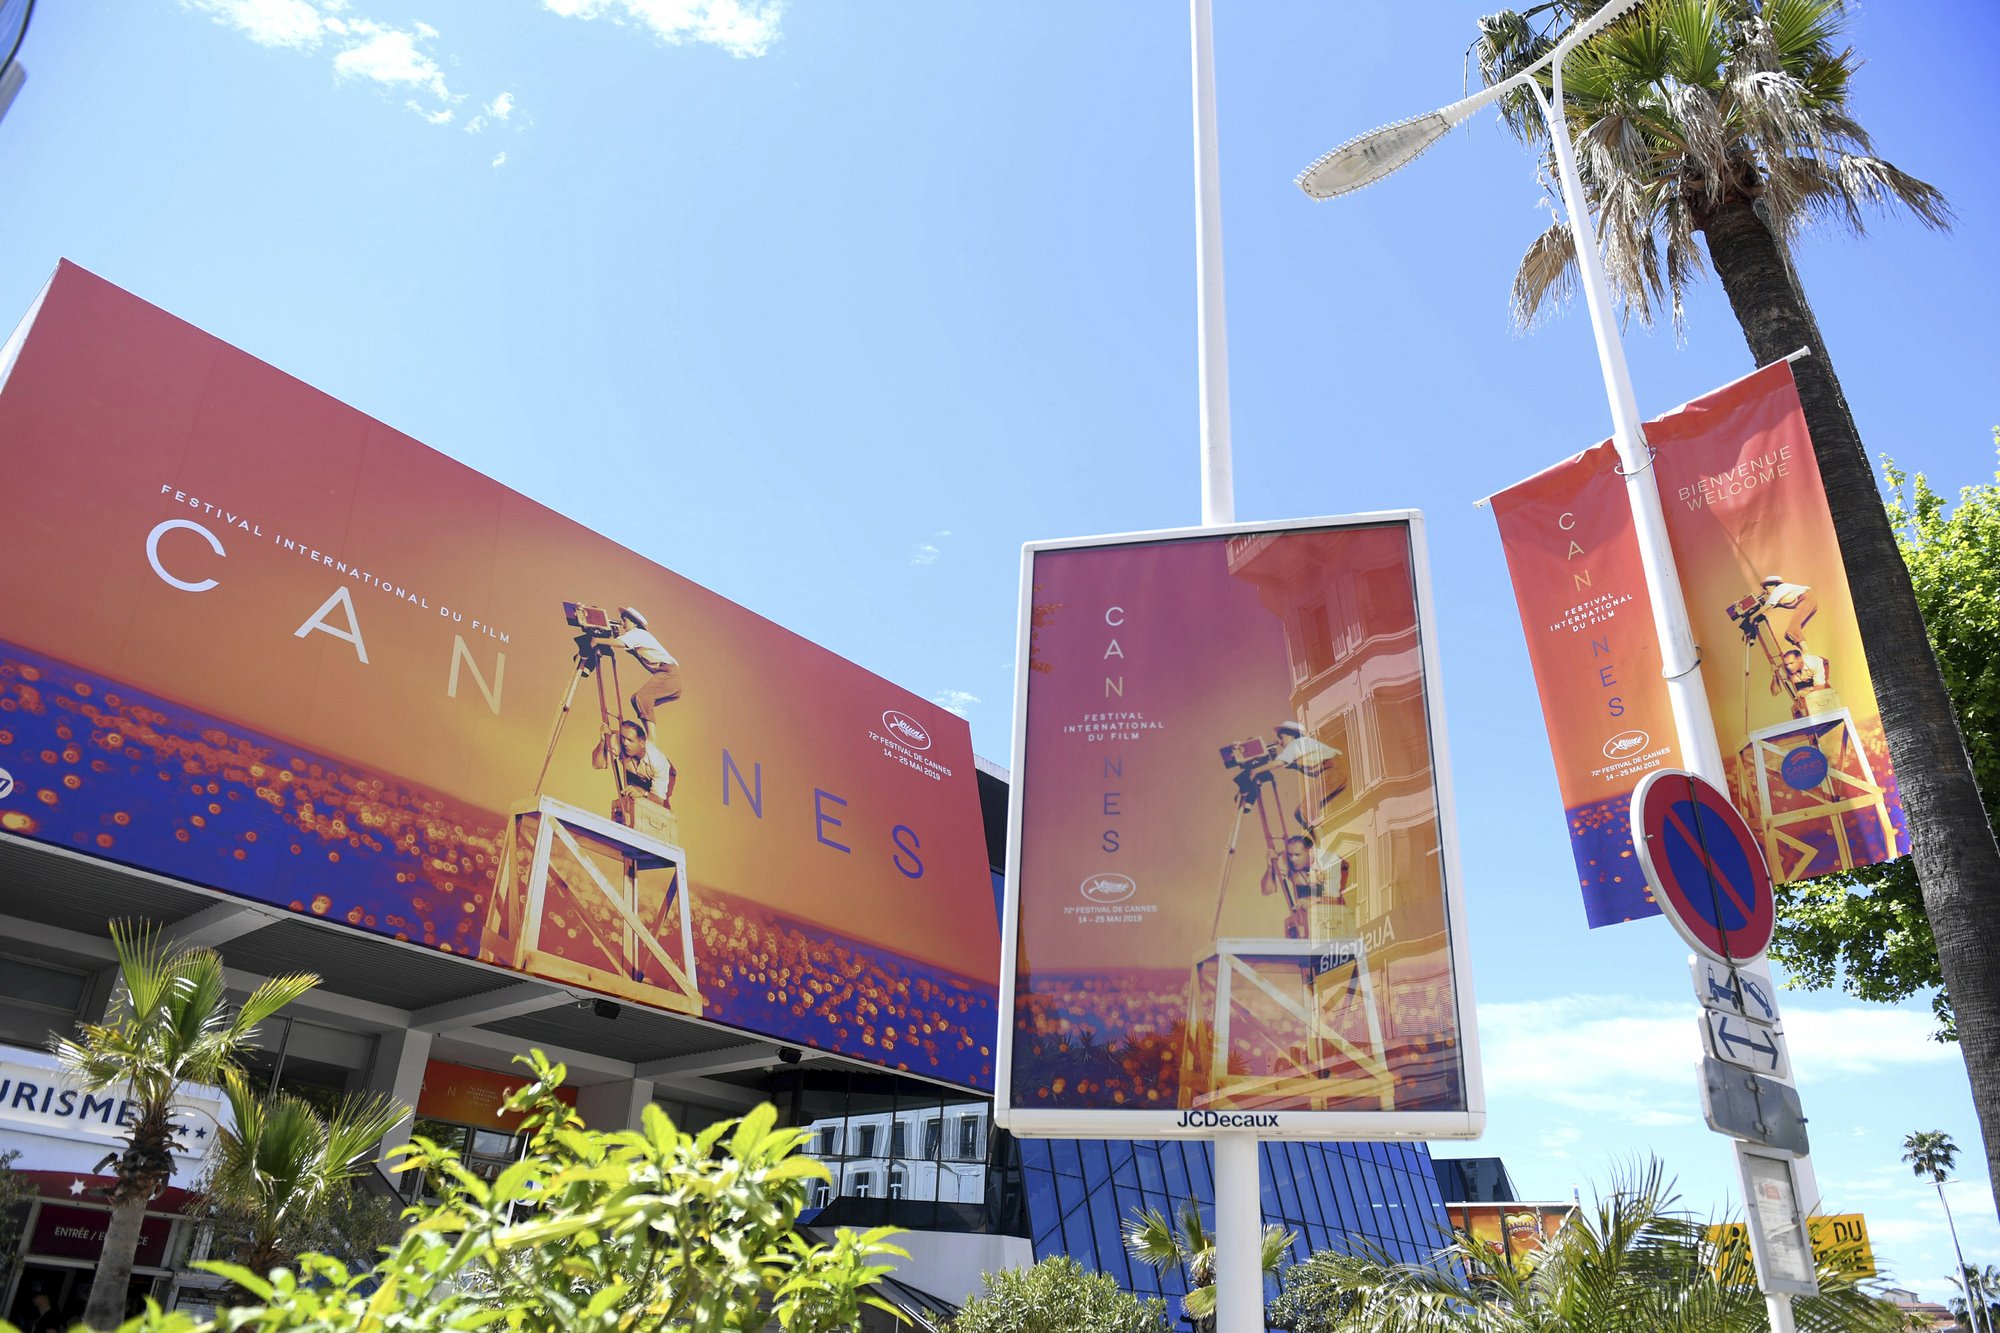 Cannes Film festival set to open